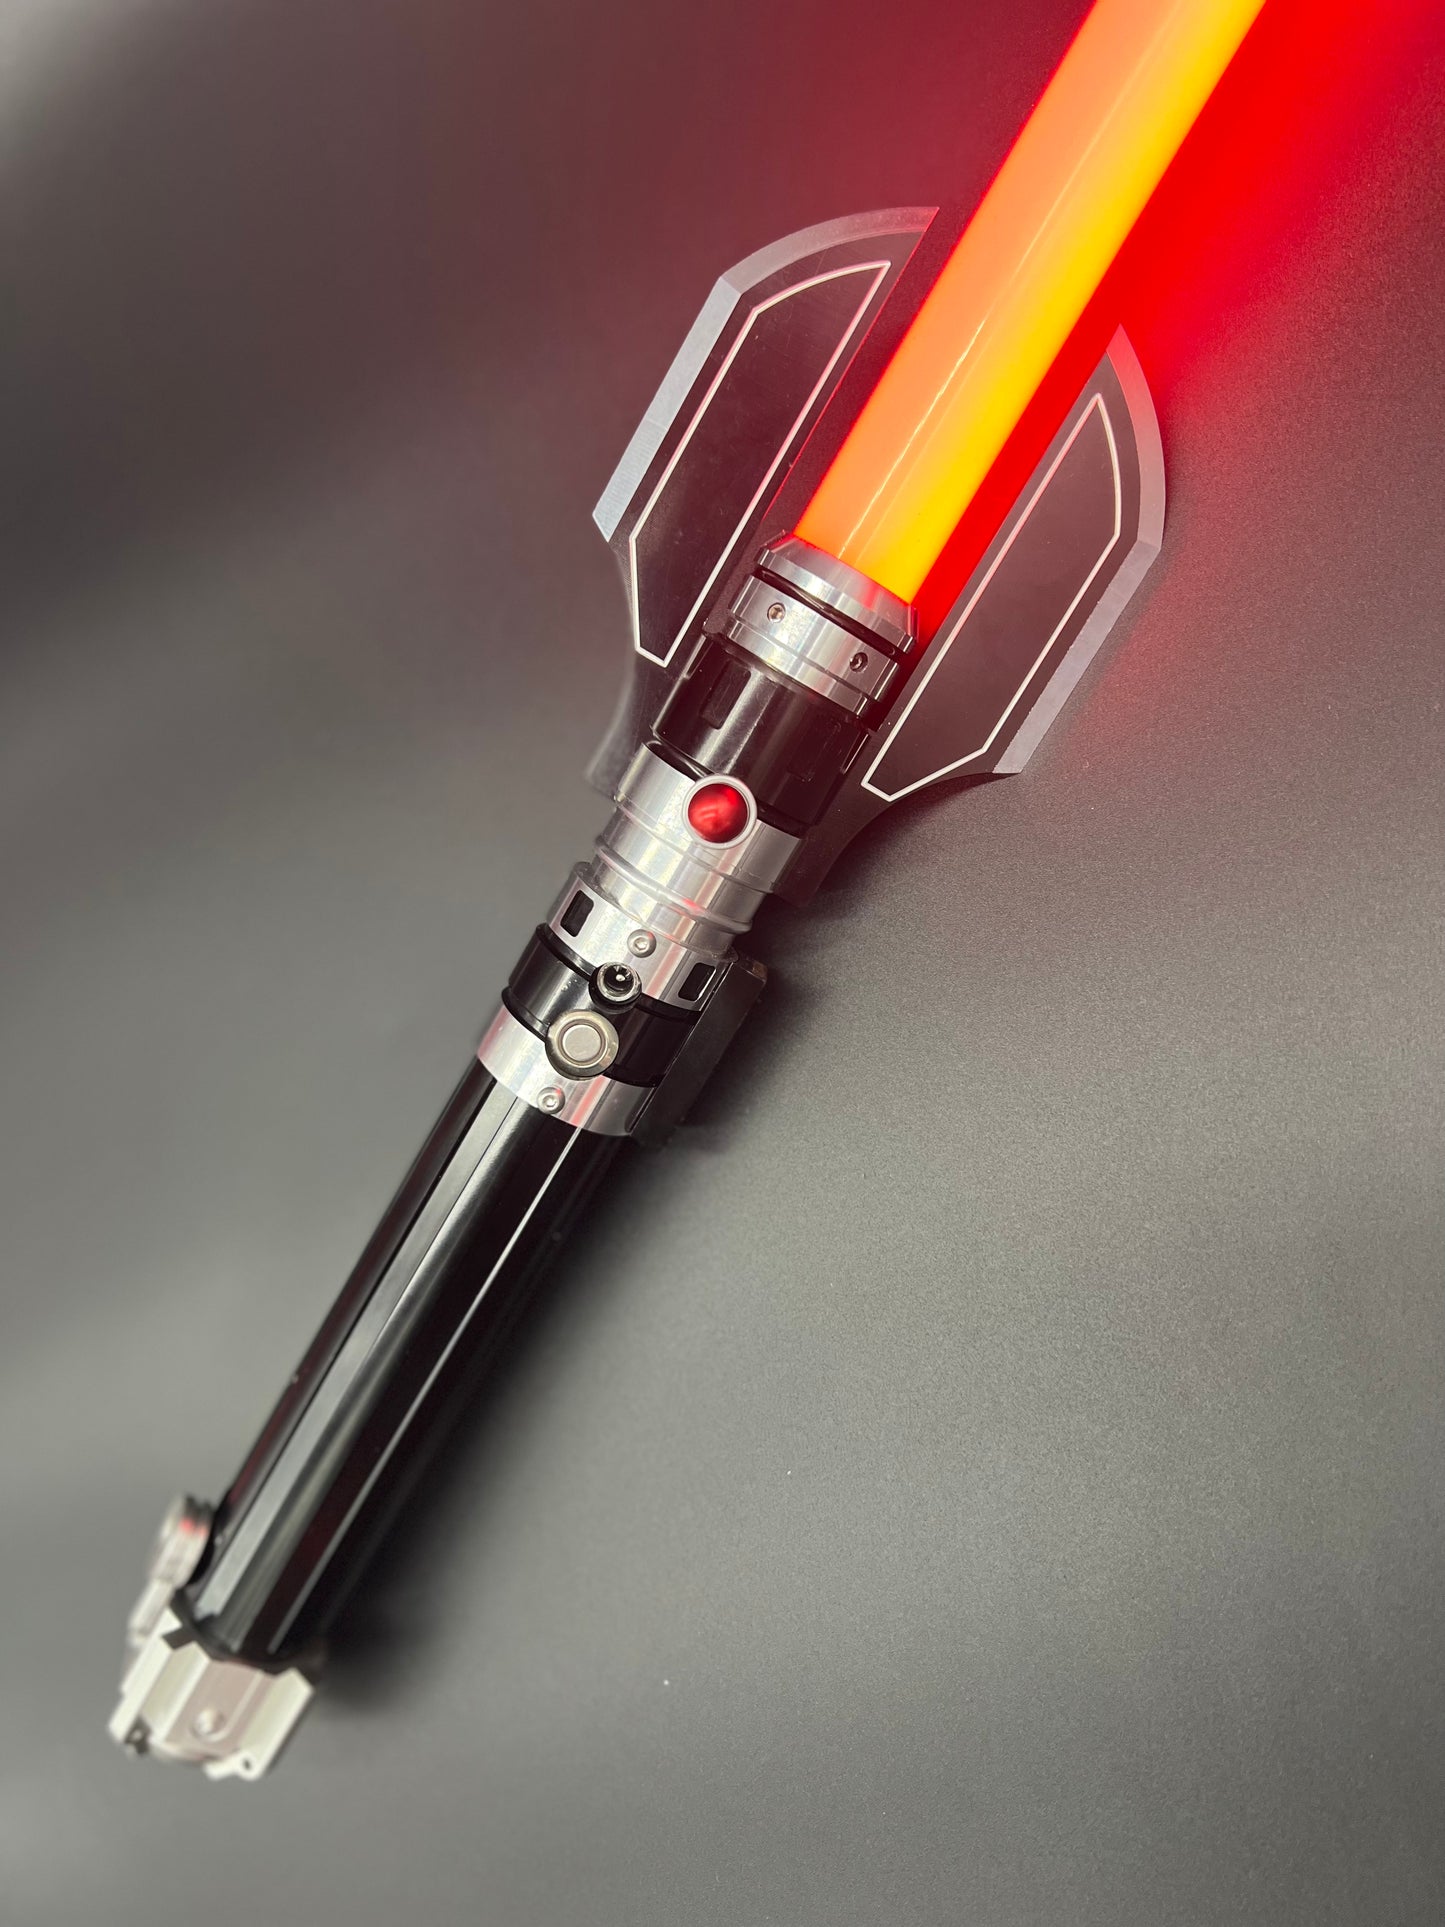 THE MIGHTY MALGUS LIGHTSABER